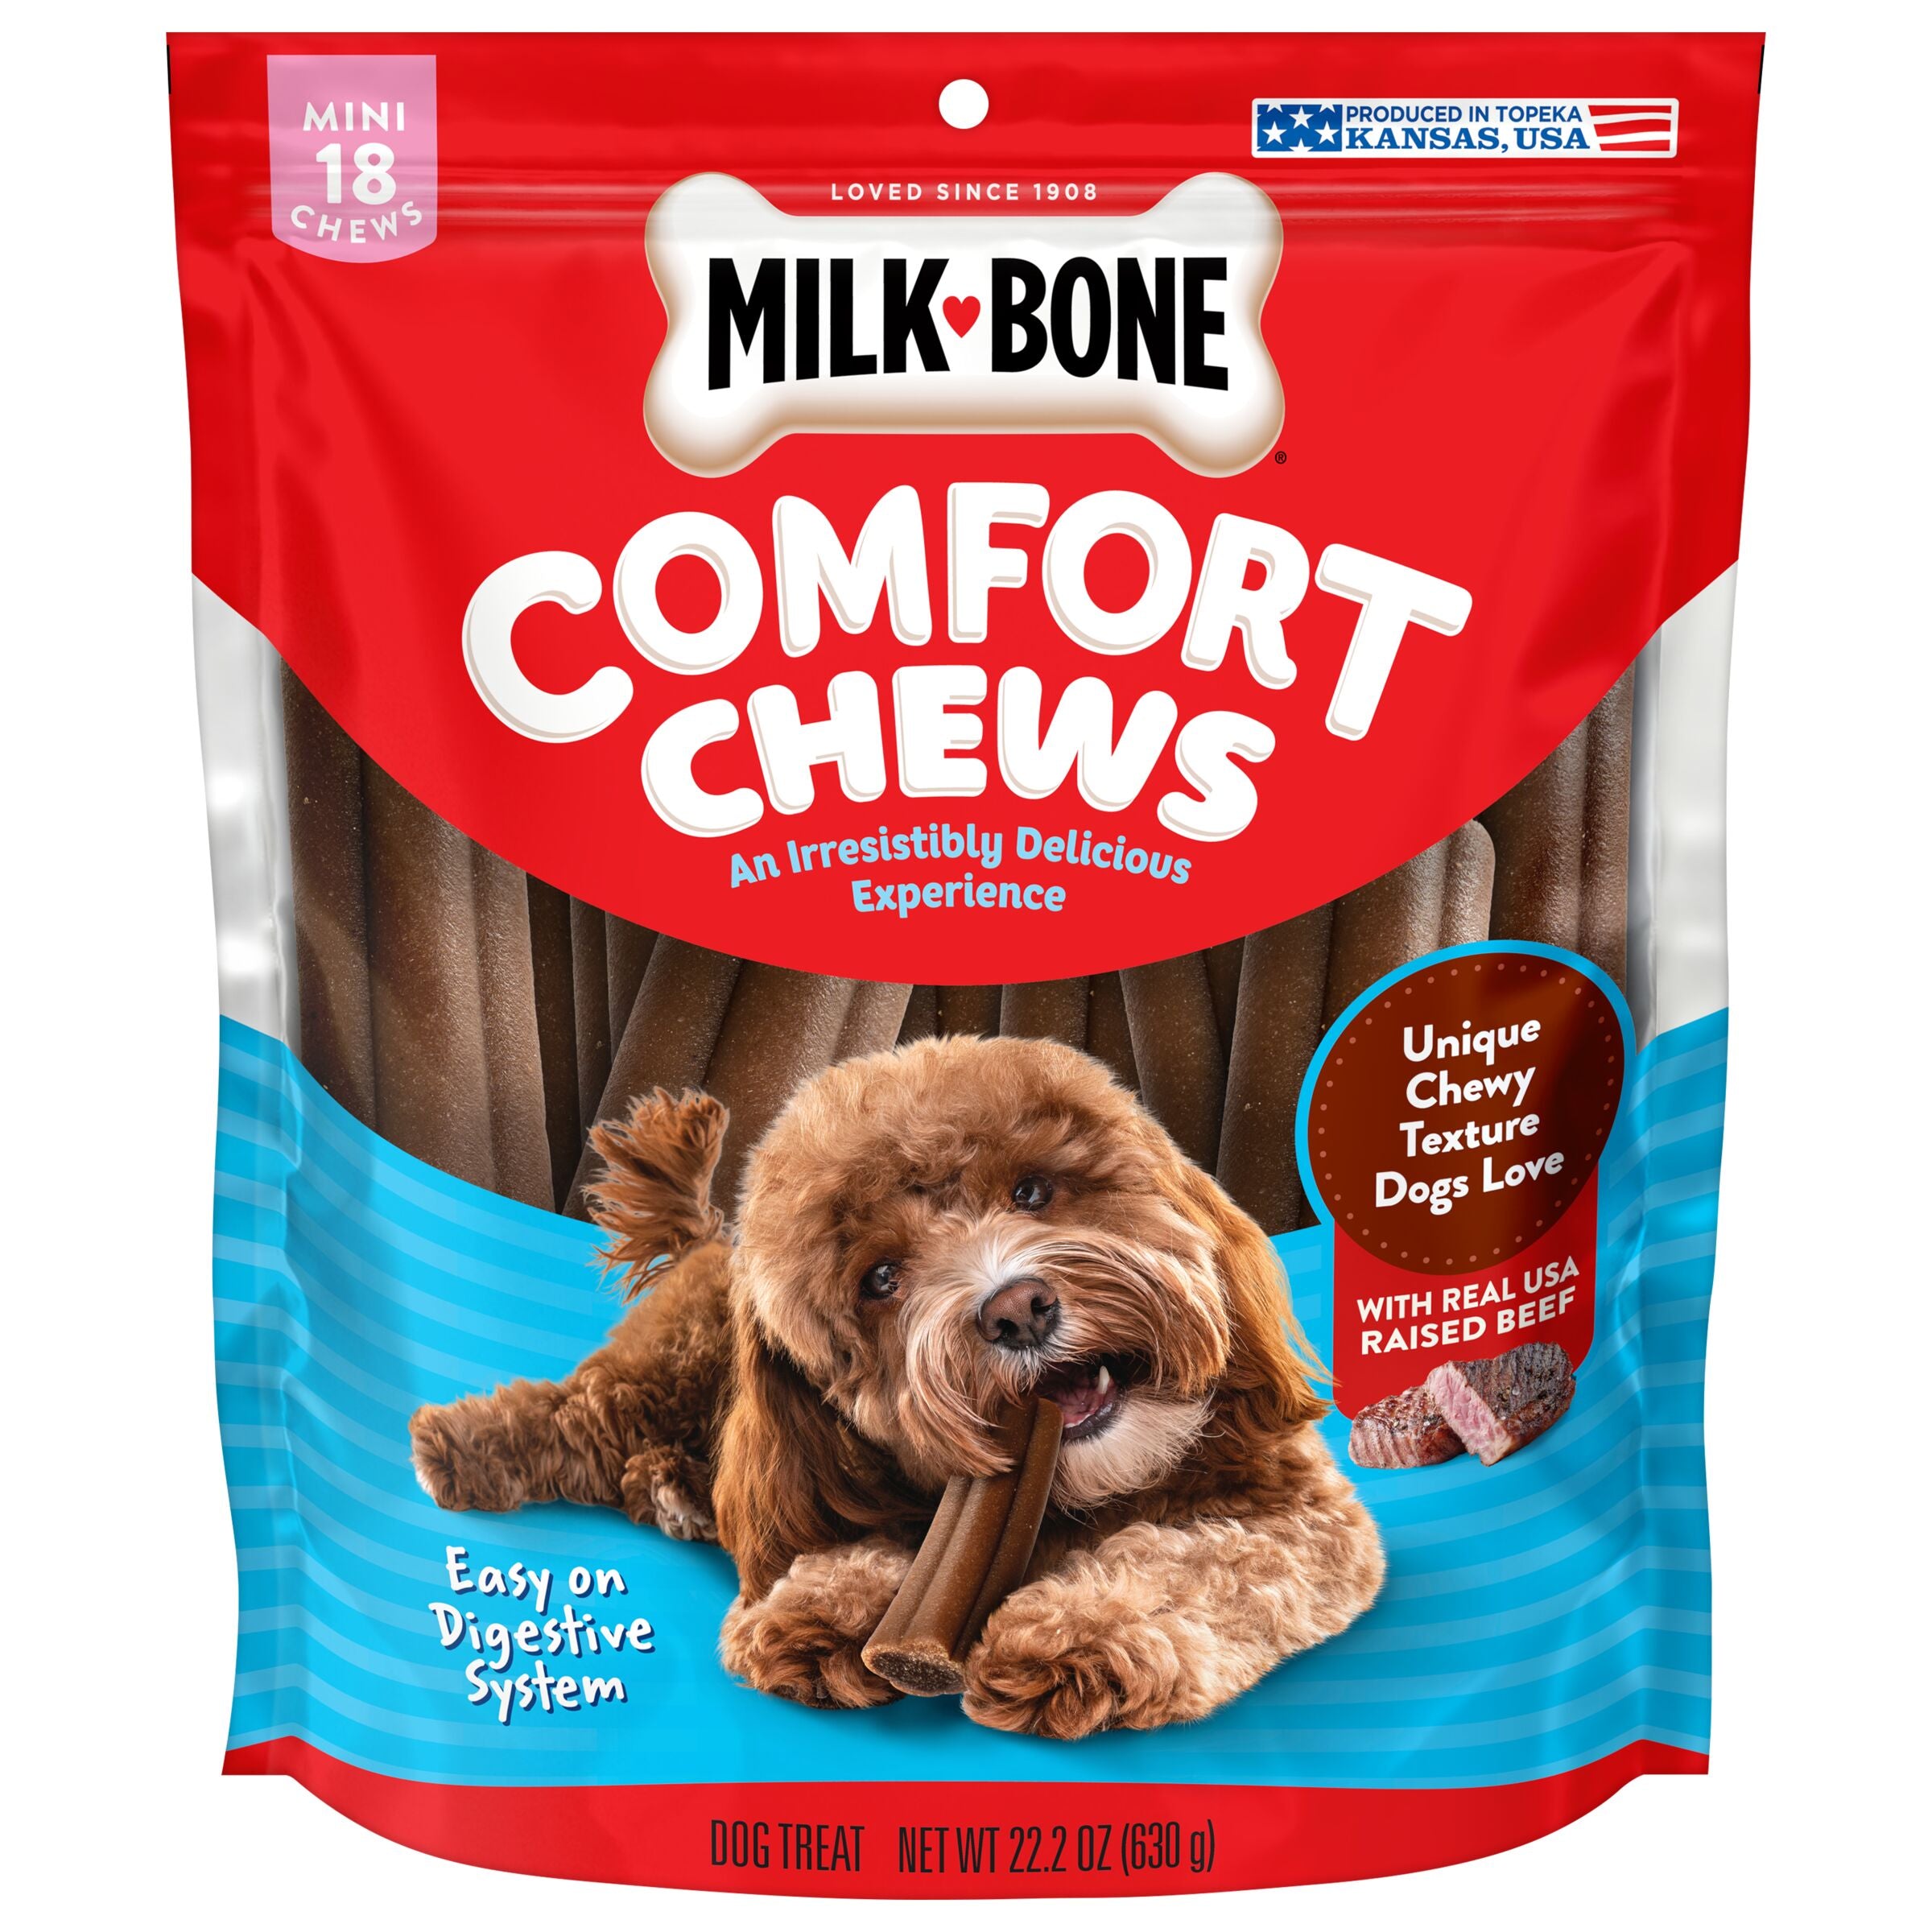 Milk-Bone Mini Comfort Chews, Dog Chews with Unique Chewy Texture and Real Beef